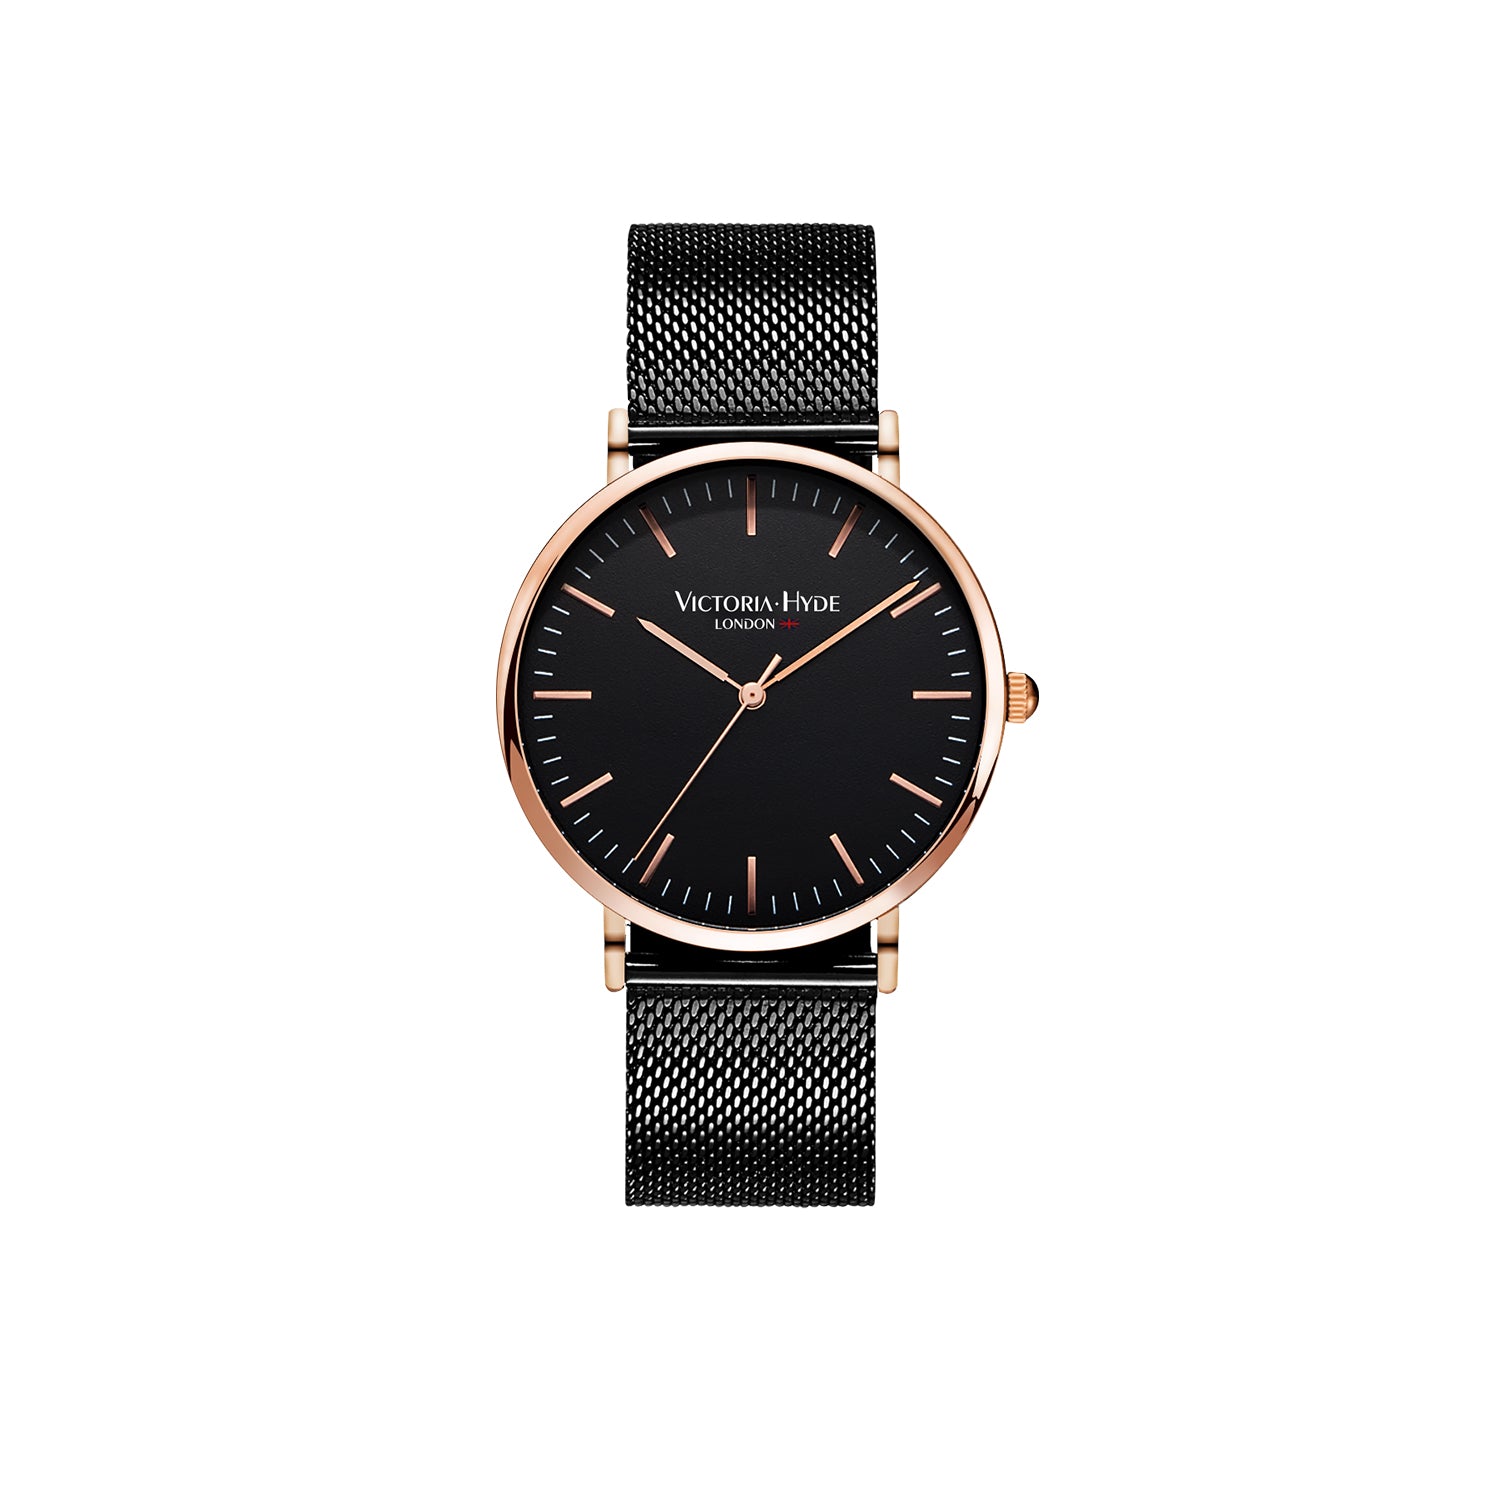 The City Collection watch in black